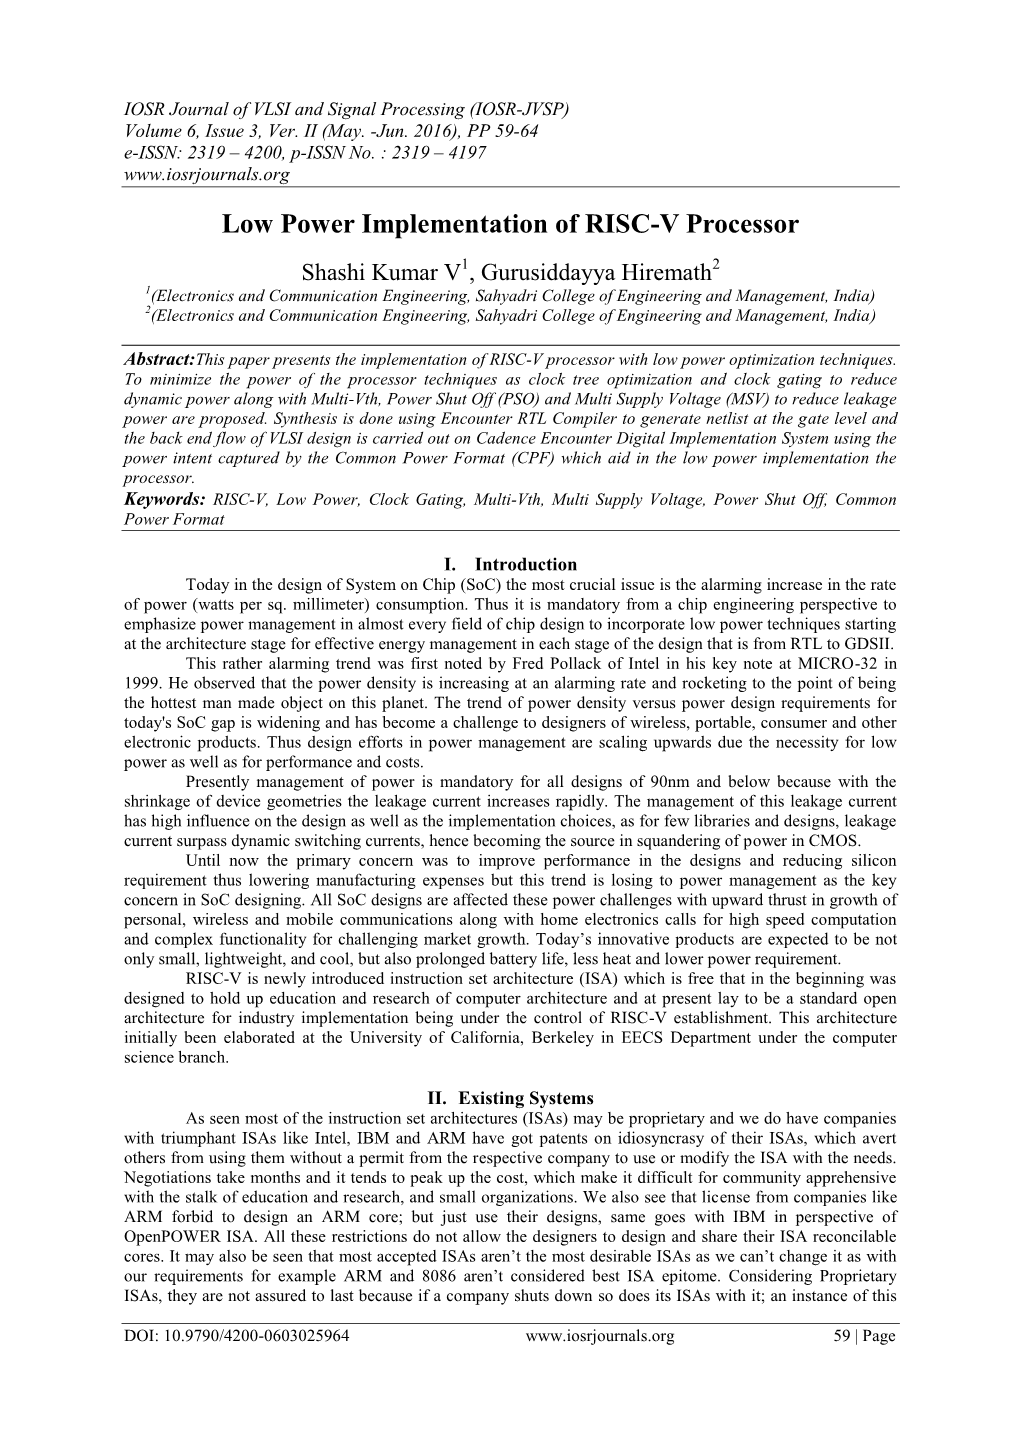 Low Power Implementation of RISC-V Processor